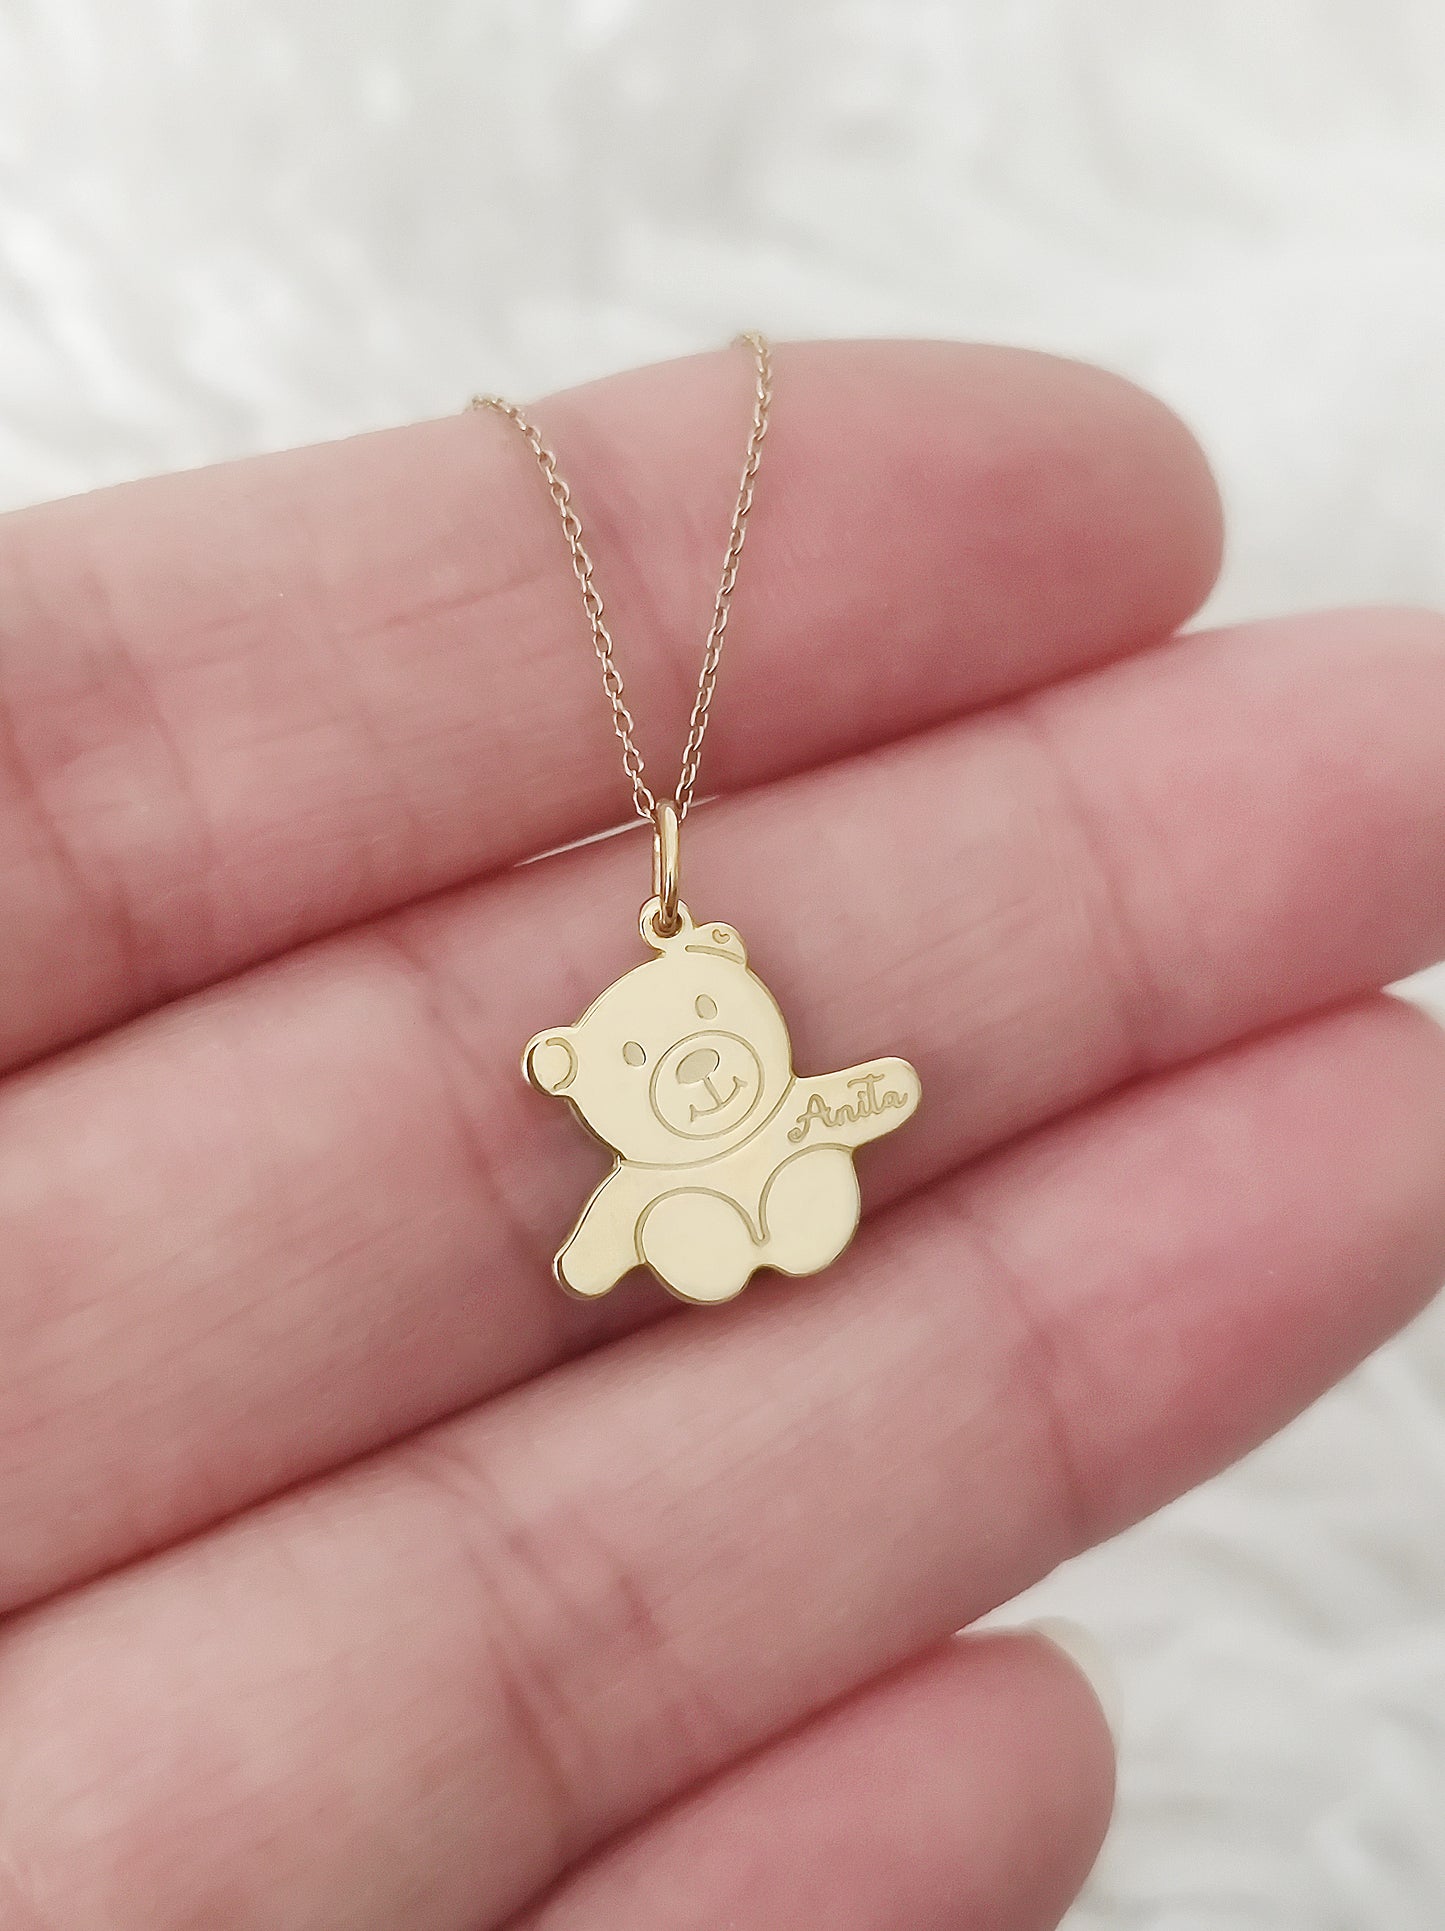 14K 9K Solid Gold Personalized Name Teddy Bear Pendant Charm Necklace